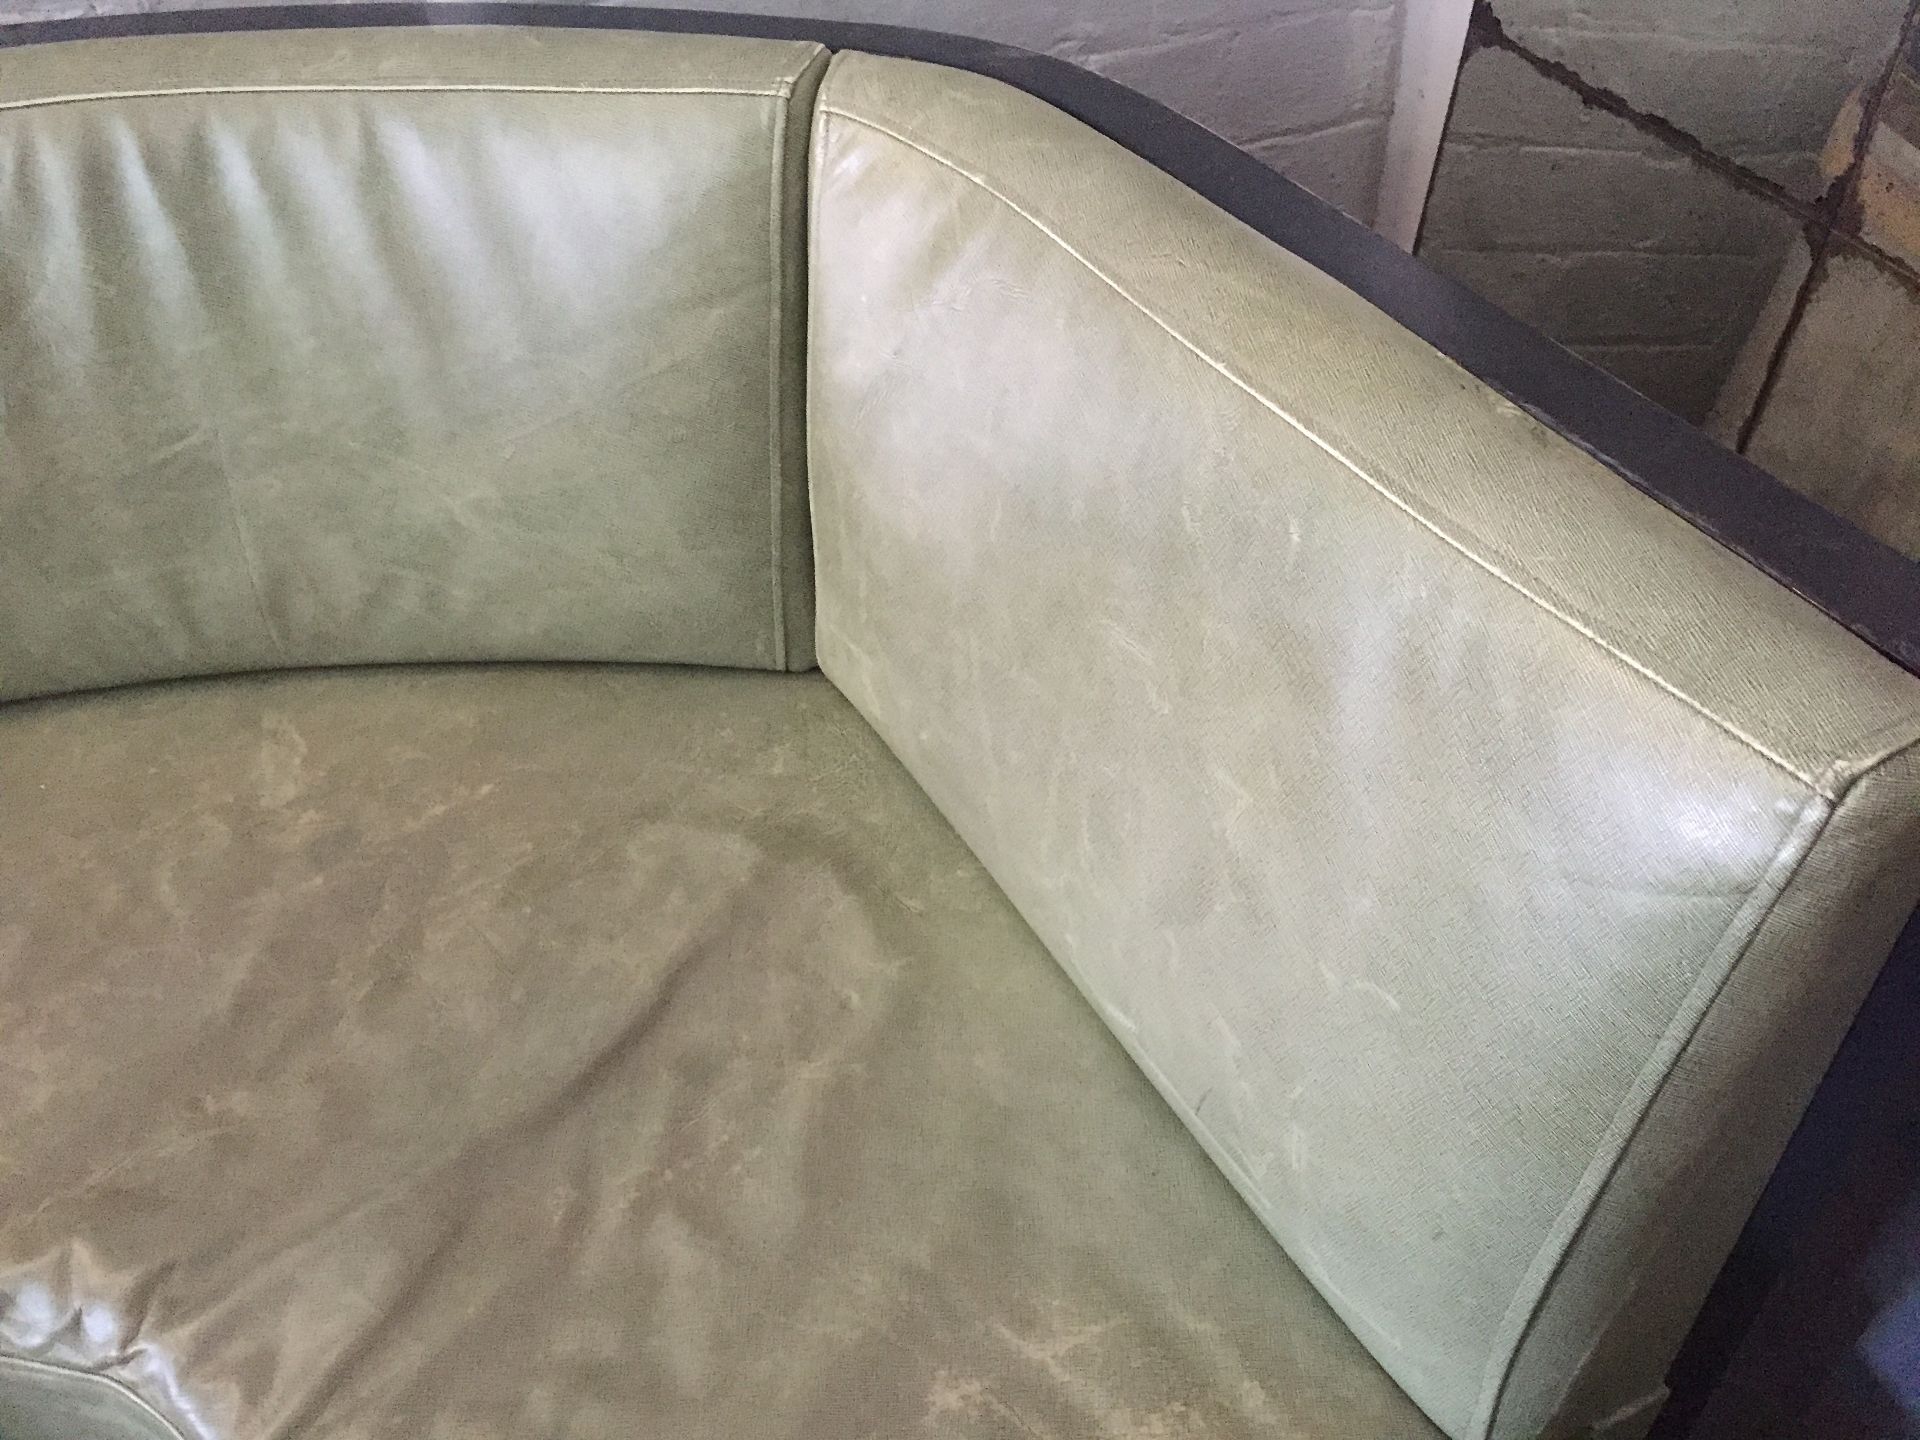 1 x Luxury Upholstered Curved Seating Area - Recently Removed From Nobu - Dimensions: W285 x D62cm x - Image 6 of 18